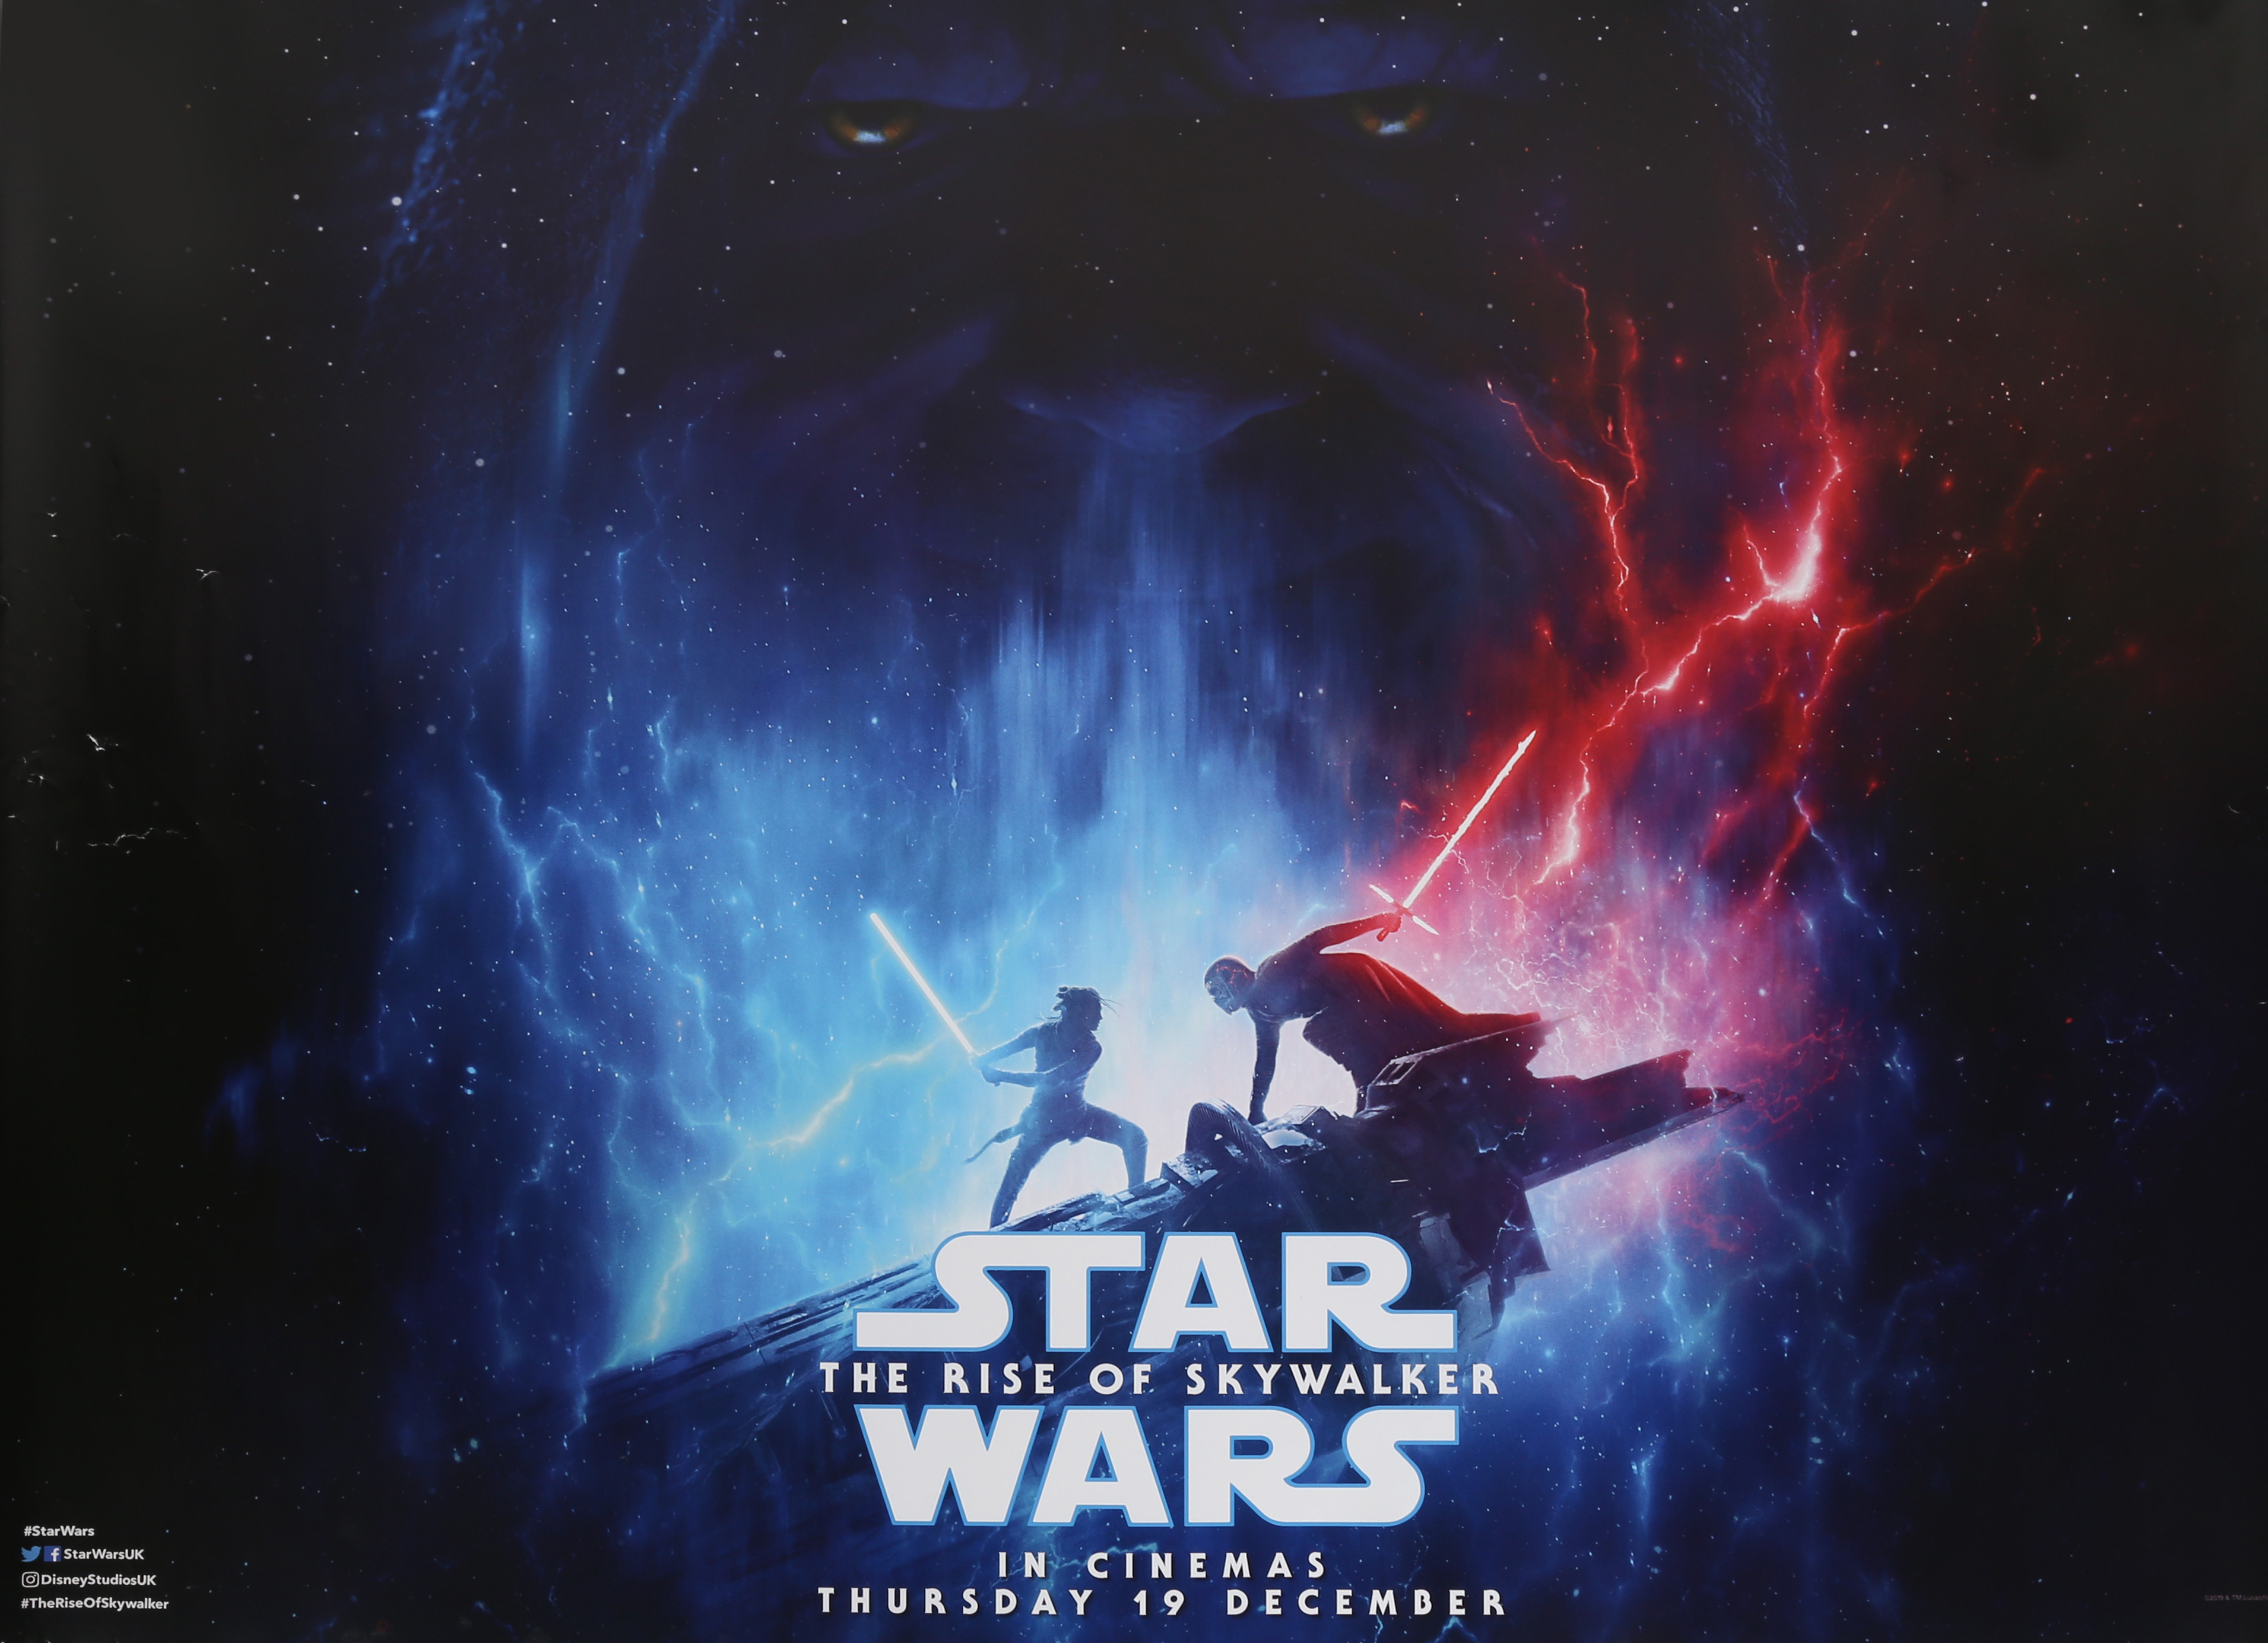 Star Wars. A collection of British Quad size Star Wars film posters. Episode I - The Phantom - Image 9 of 10